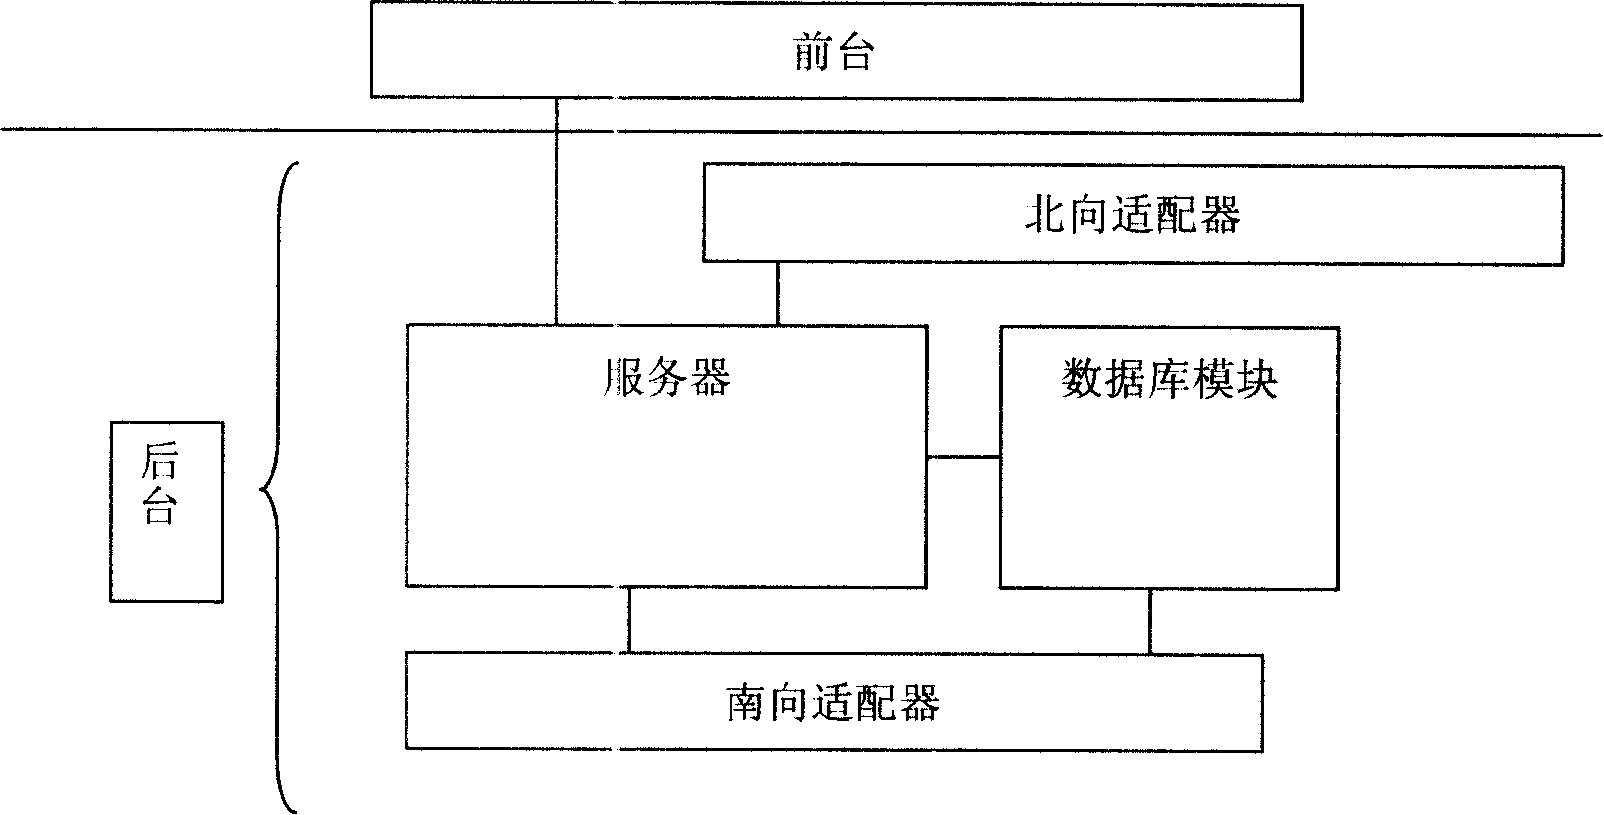 Method of implementing two-computer hot backup of network equipment management software